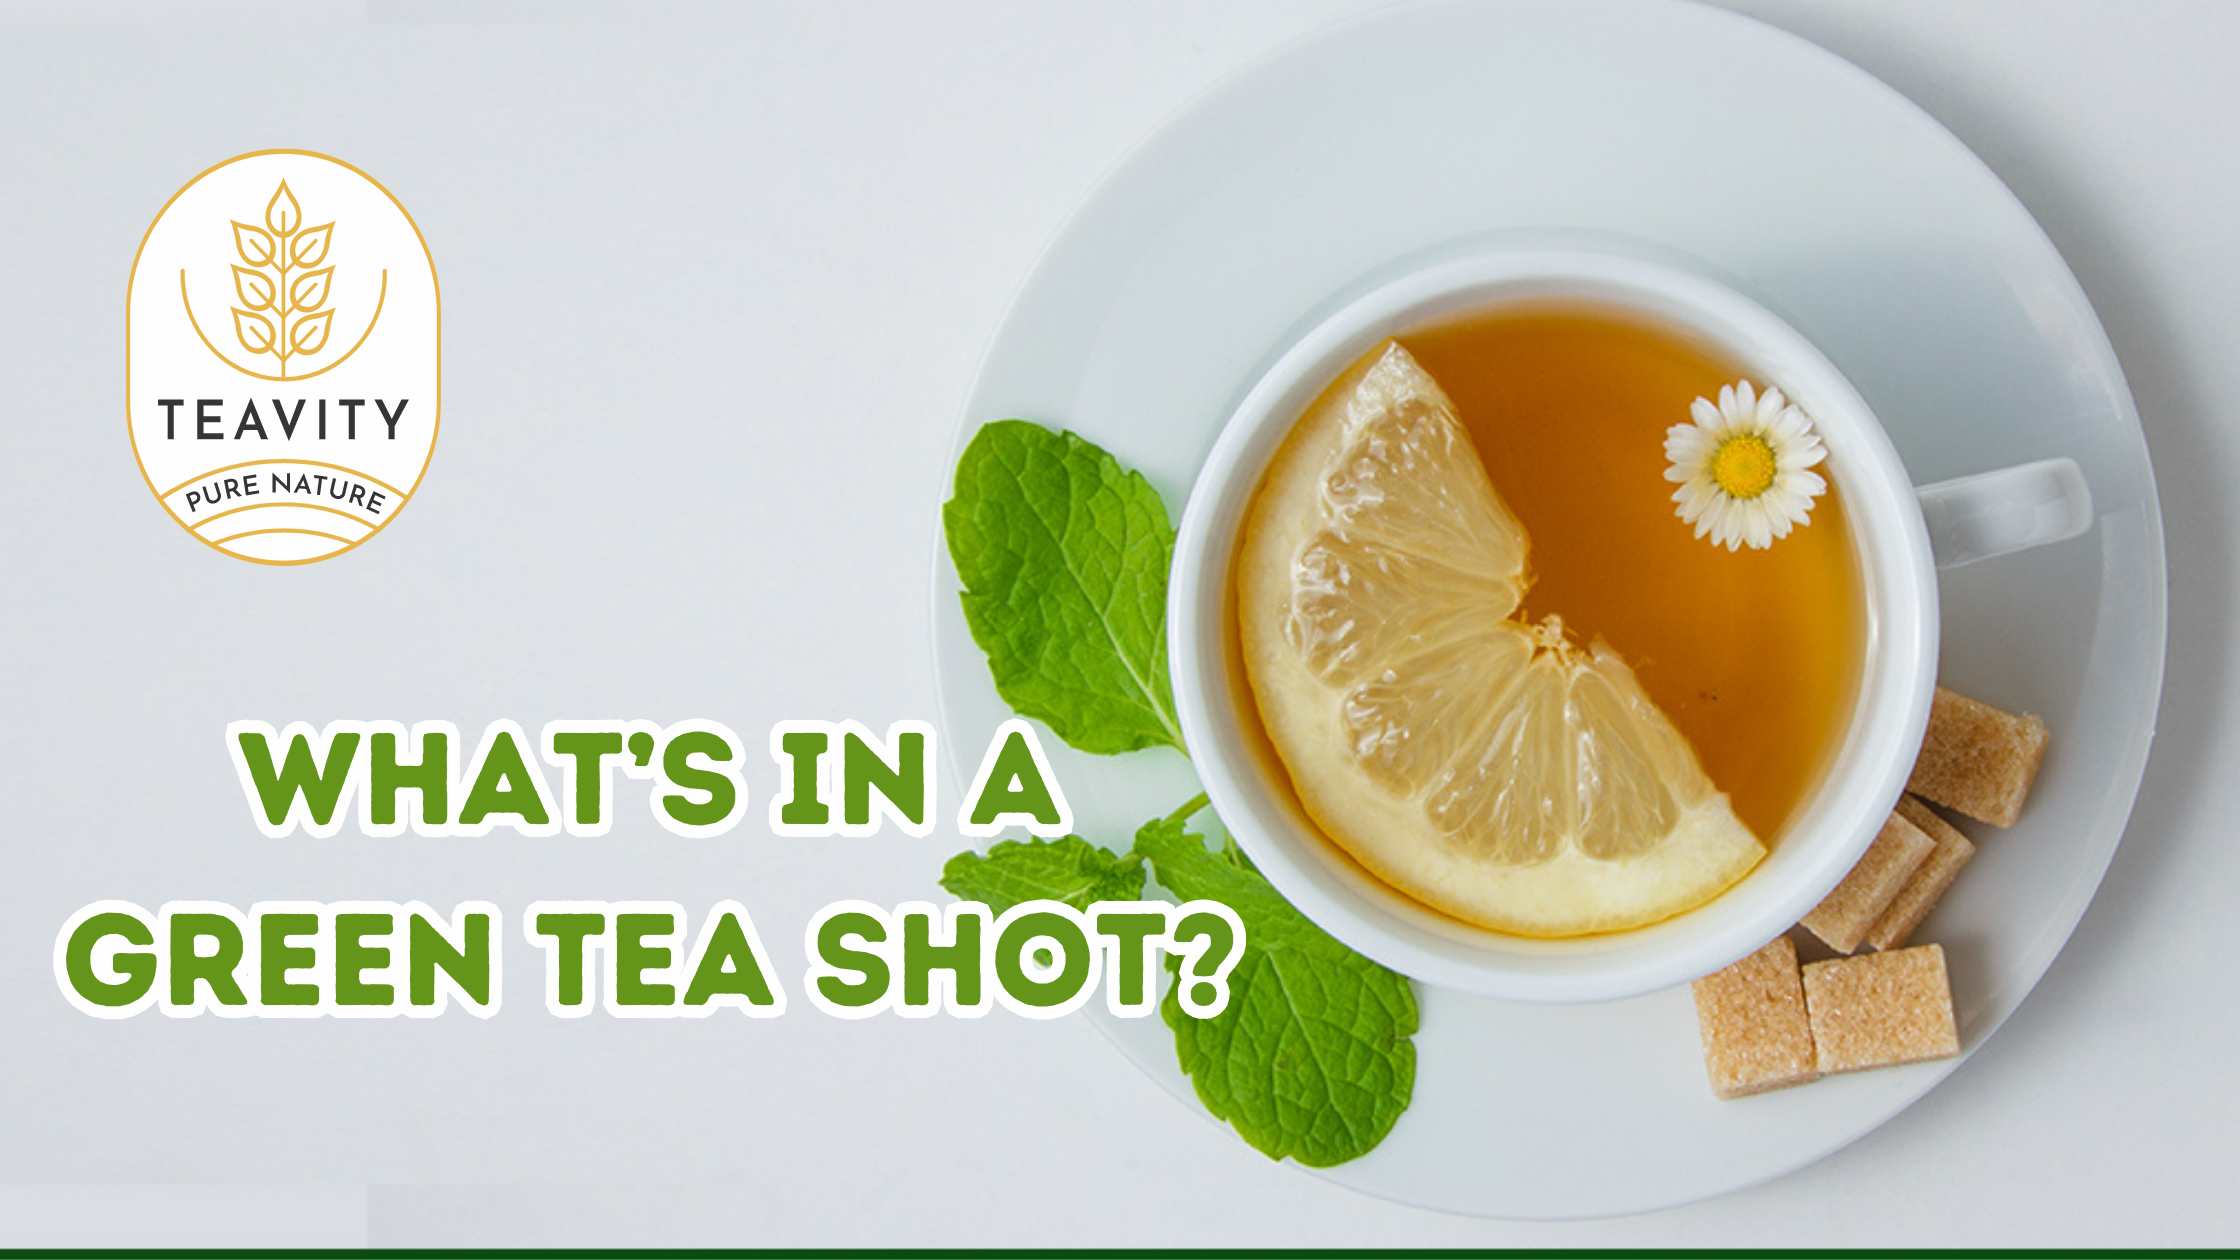 What’s in a Green Tea Shot?